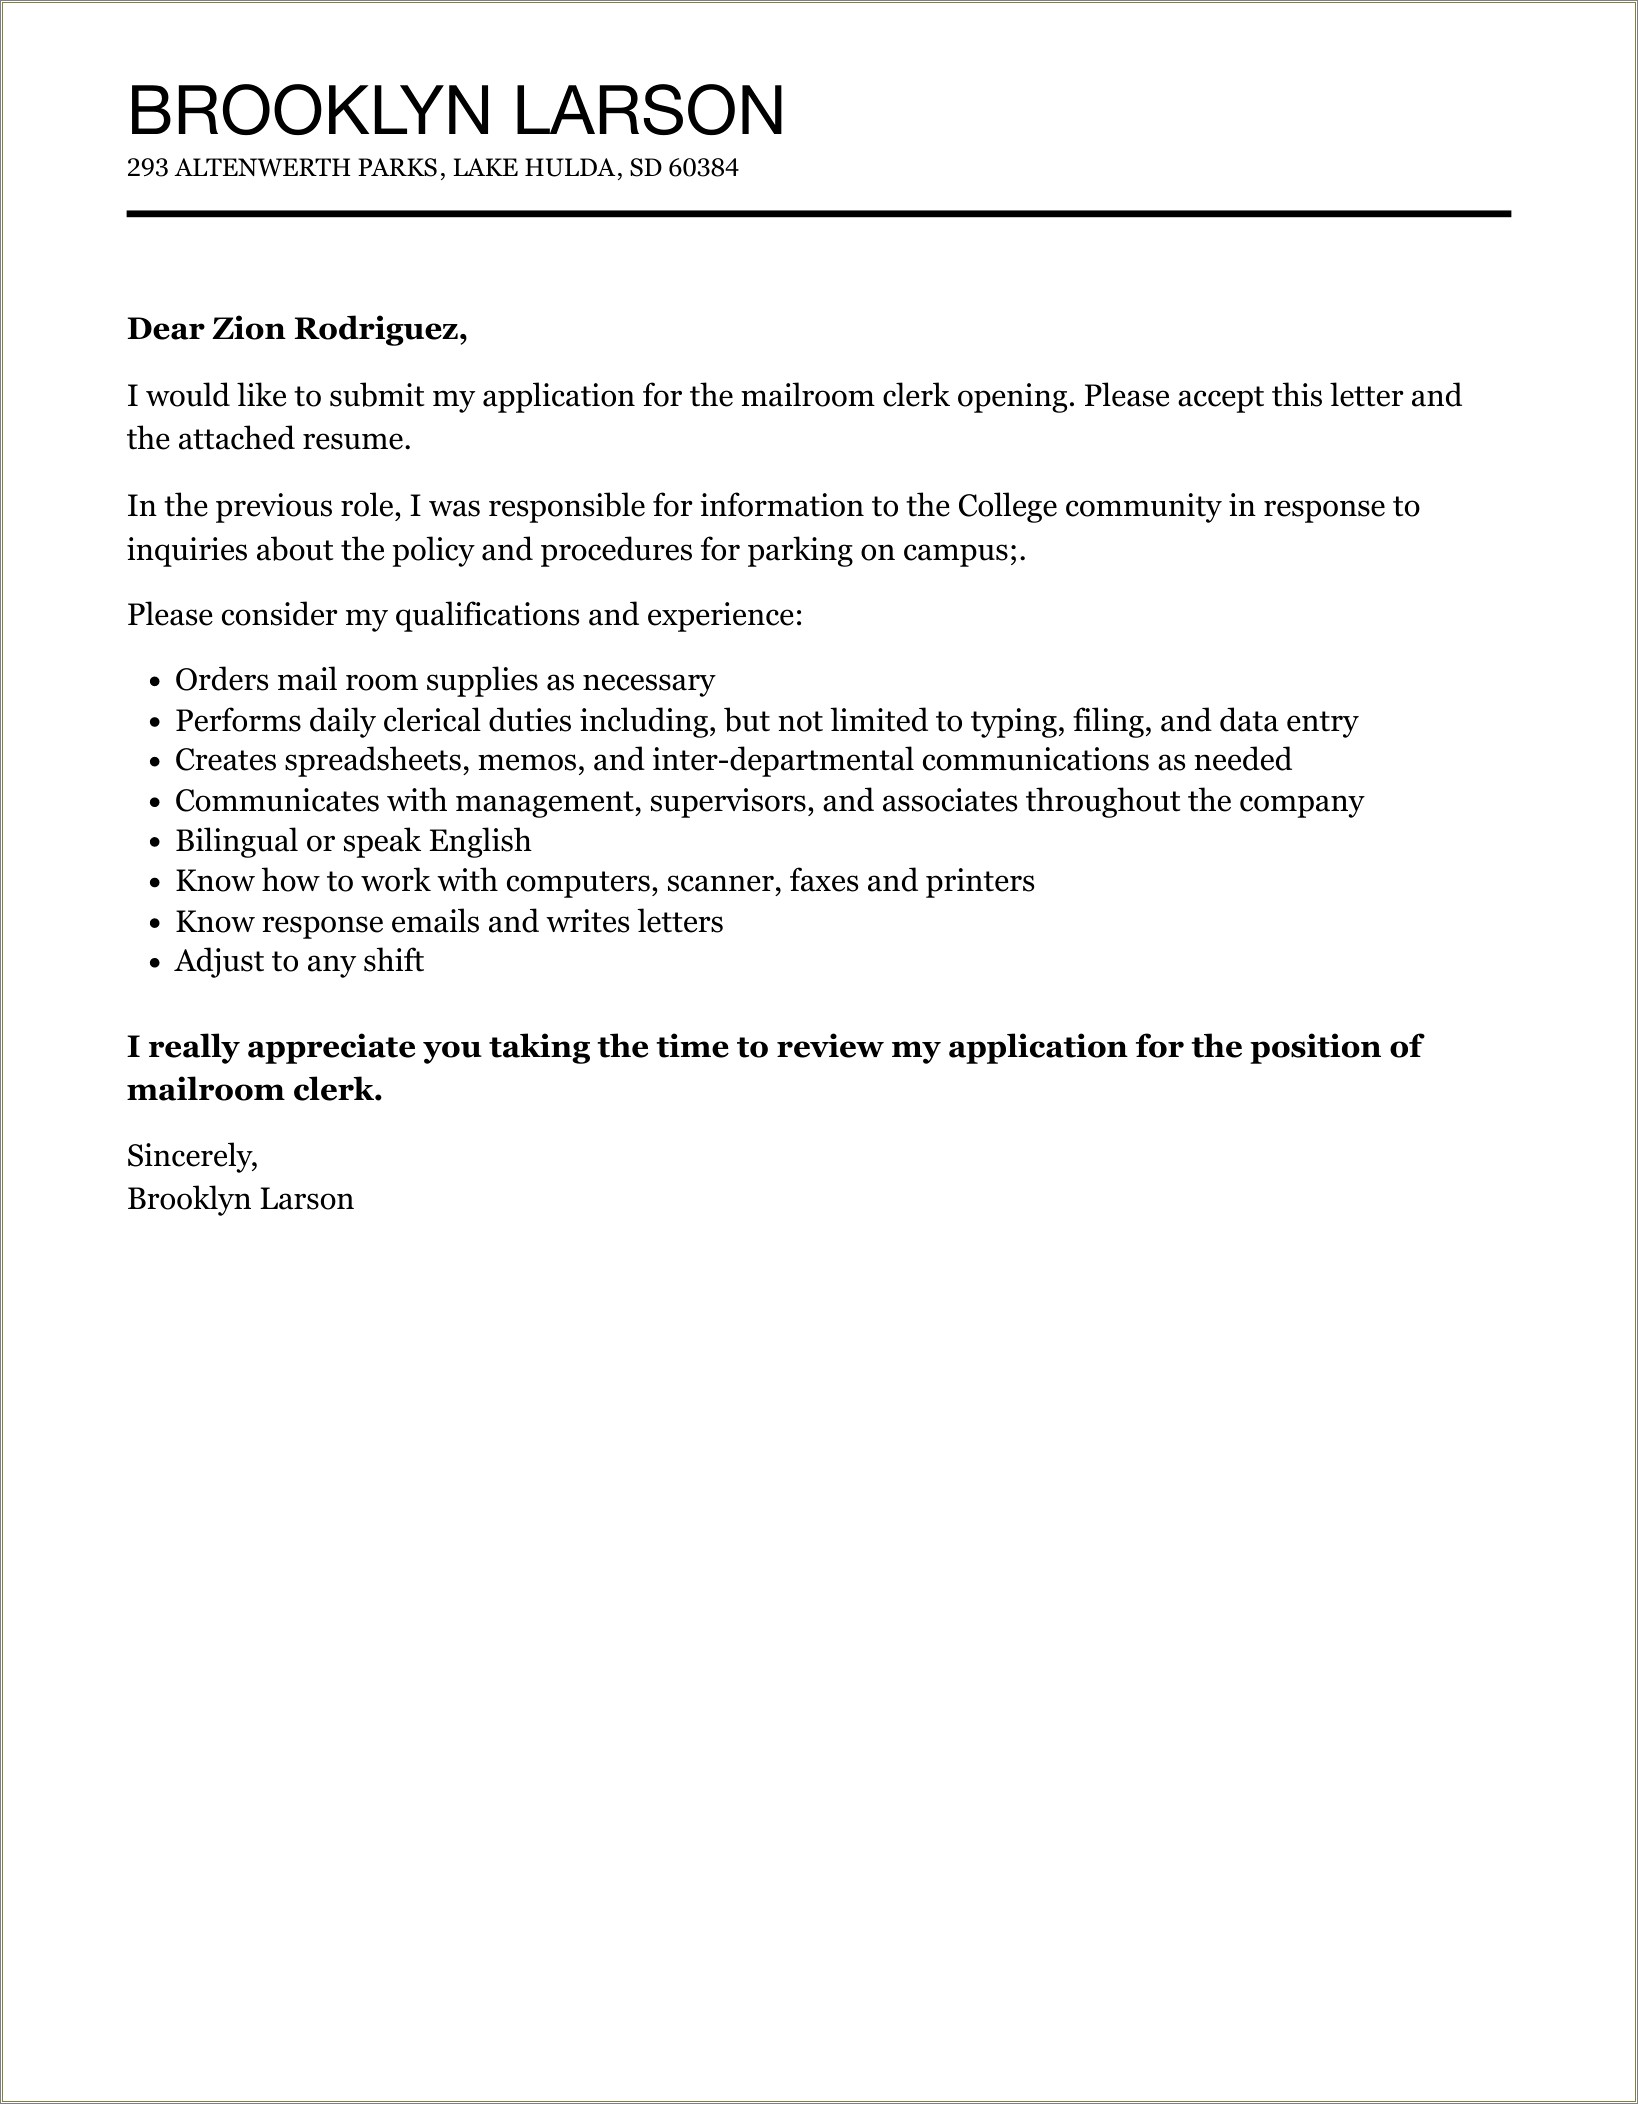 Resume Mail Room With Cover Letter